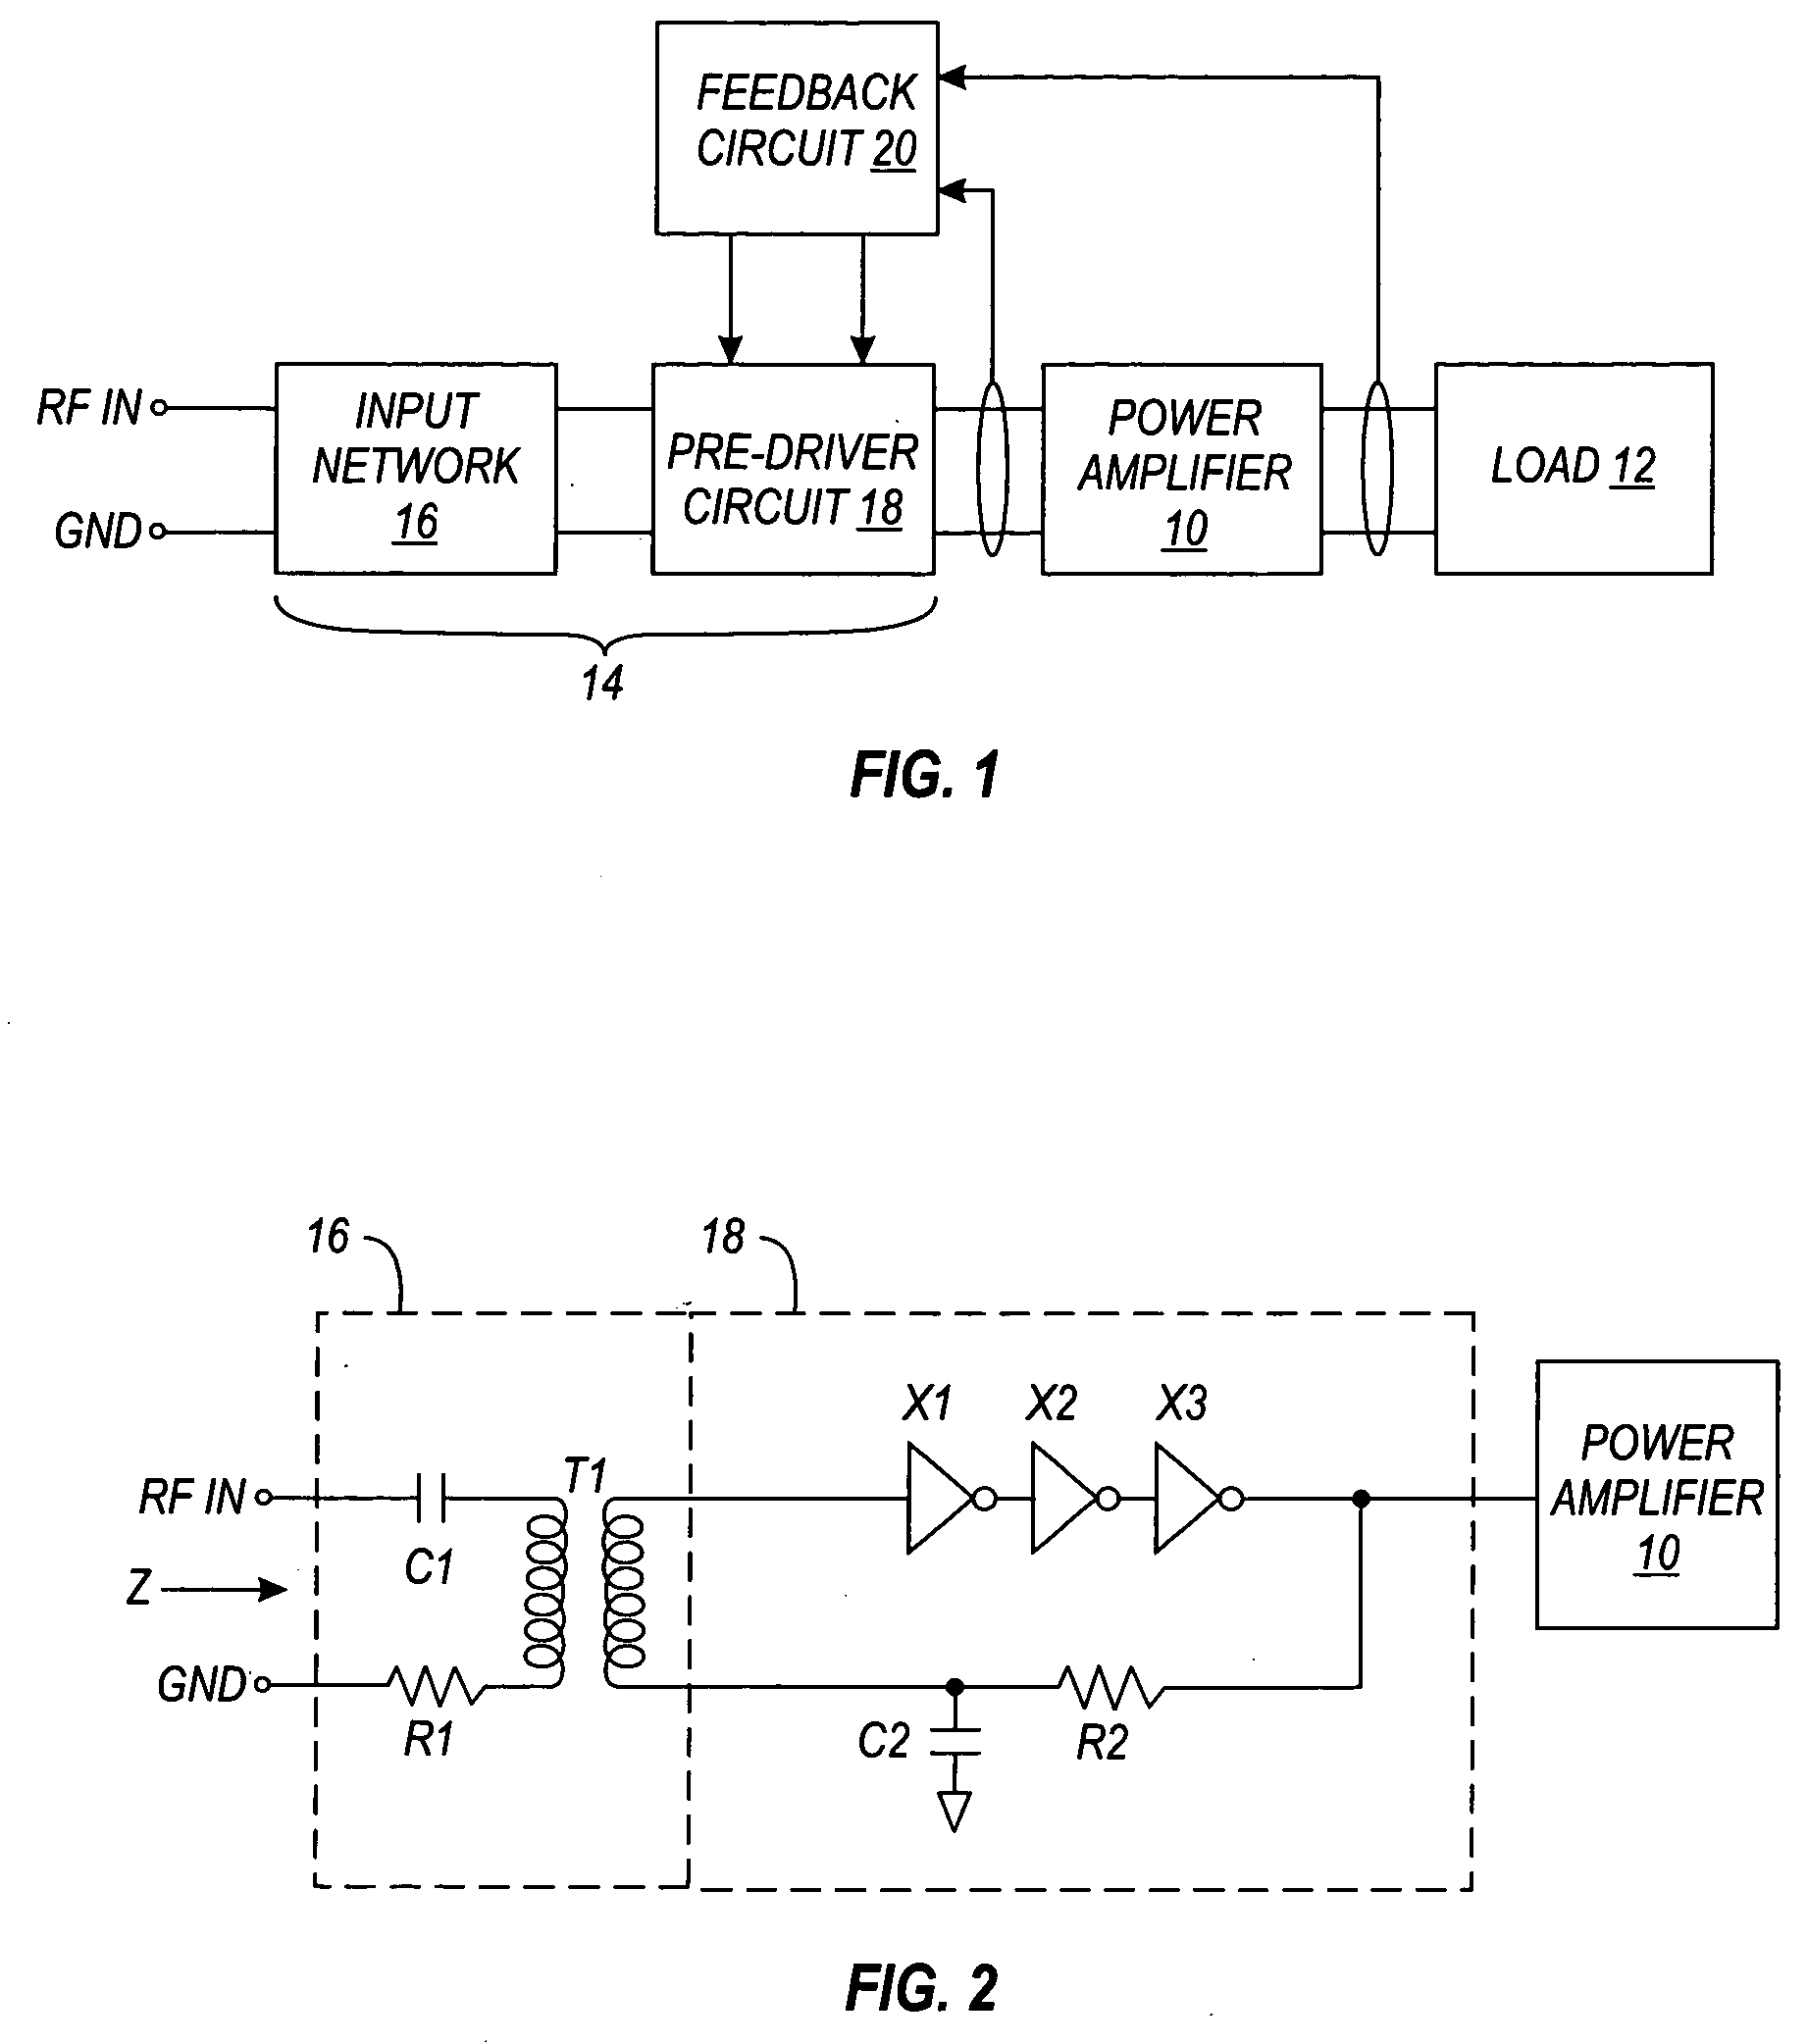 Power amplifier input structure having a differential output